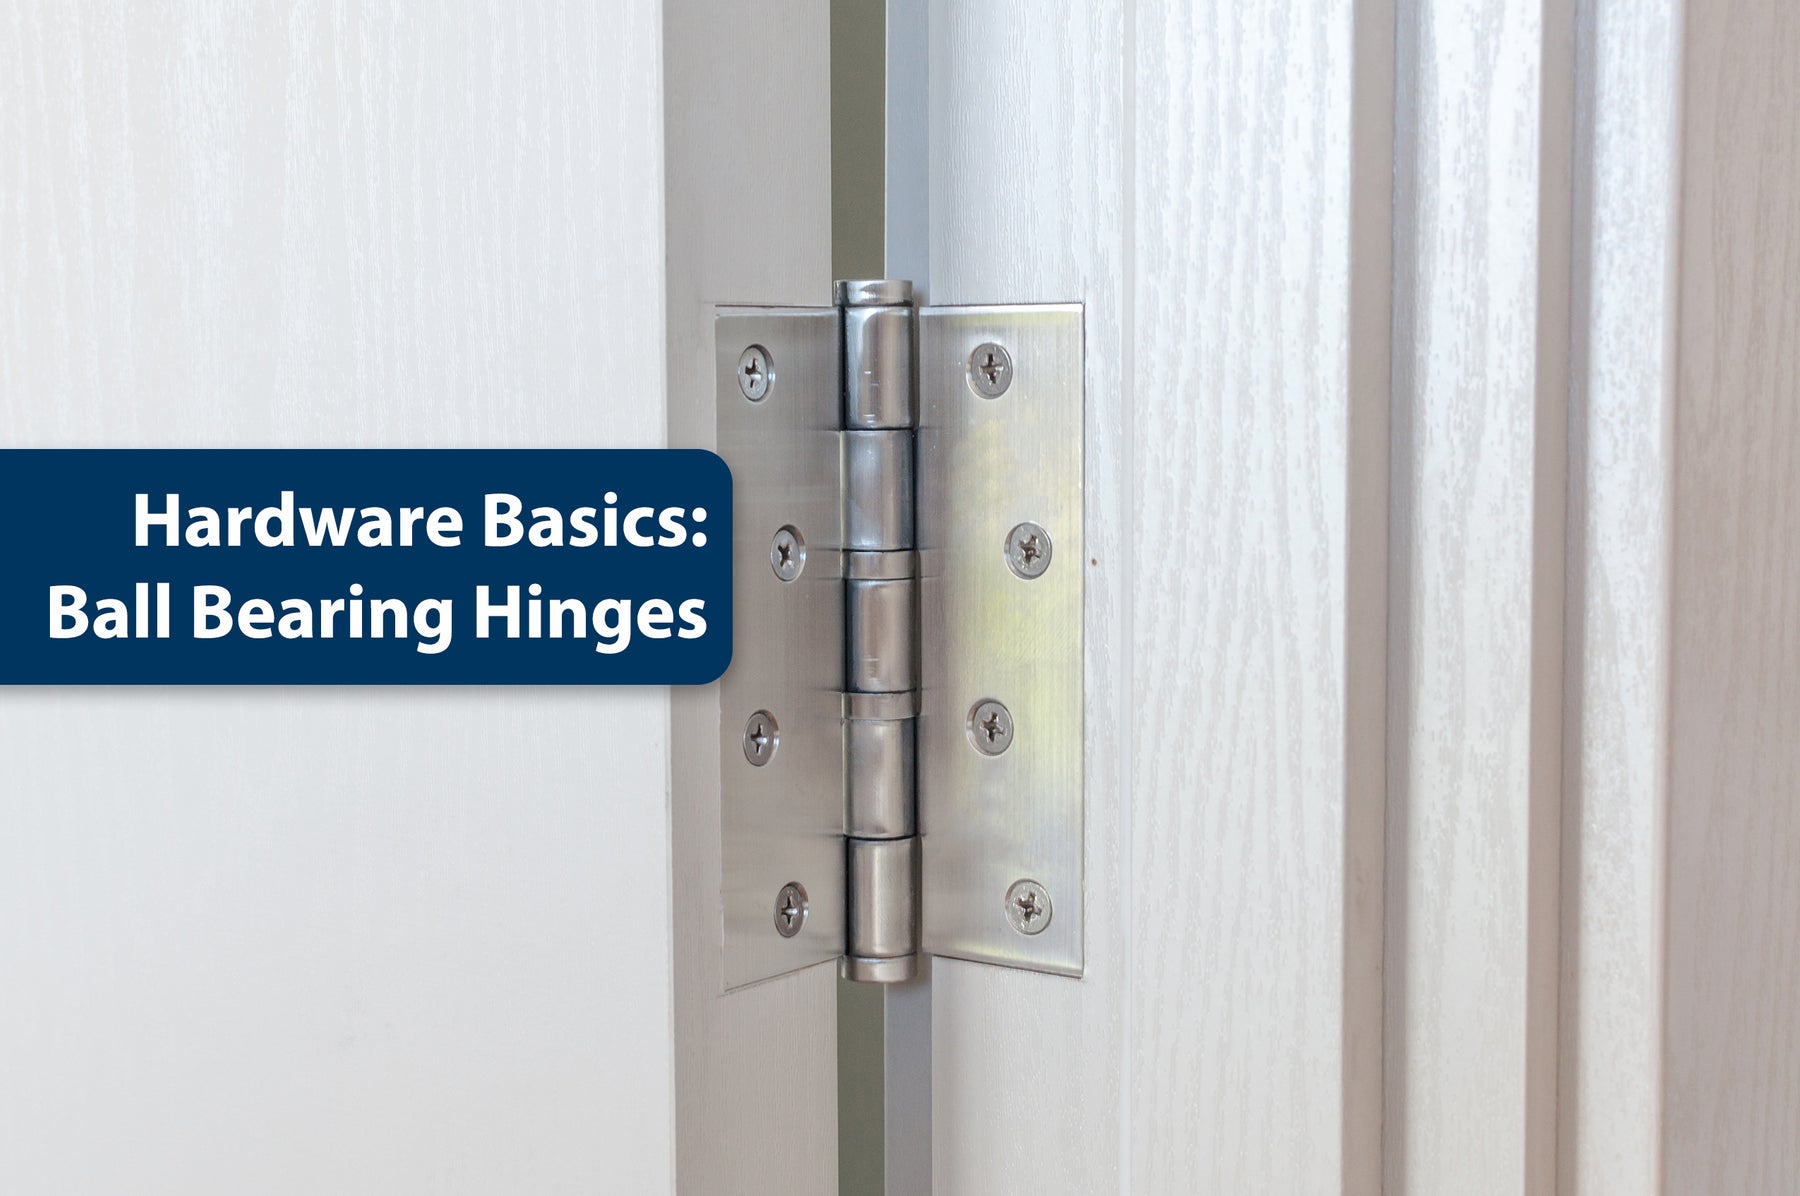 Open the Door to Better Things With Ball-Bearing Hinges